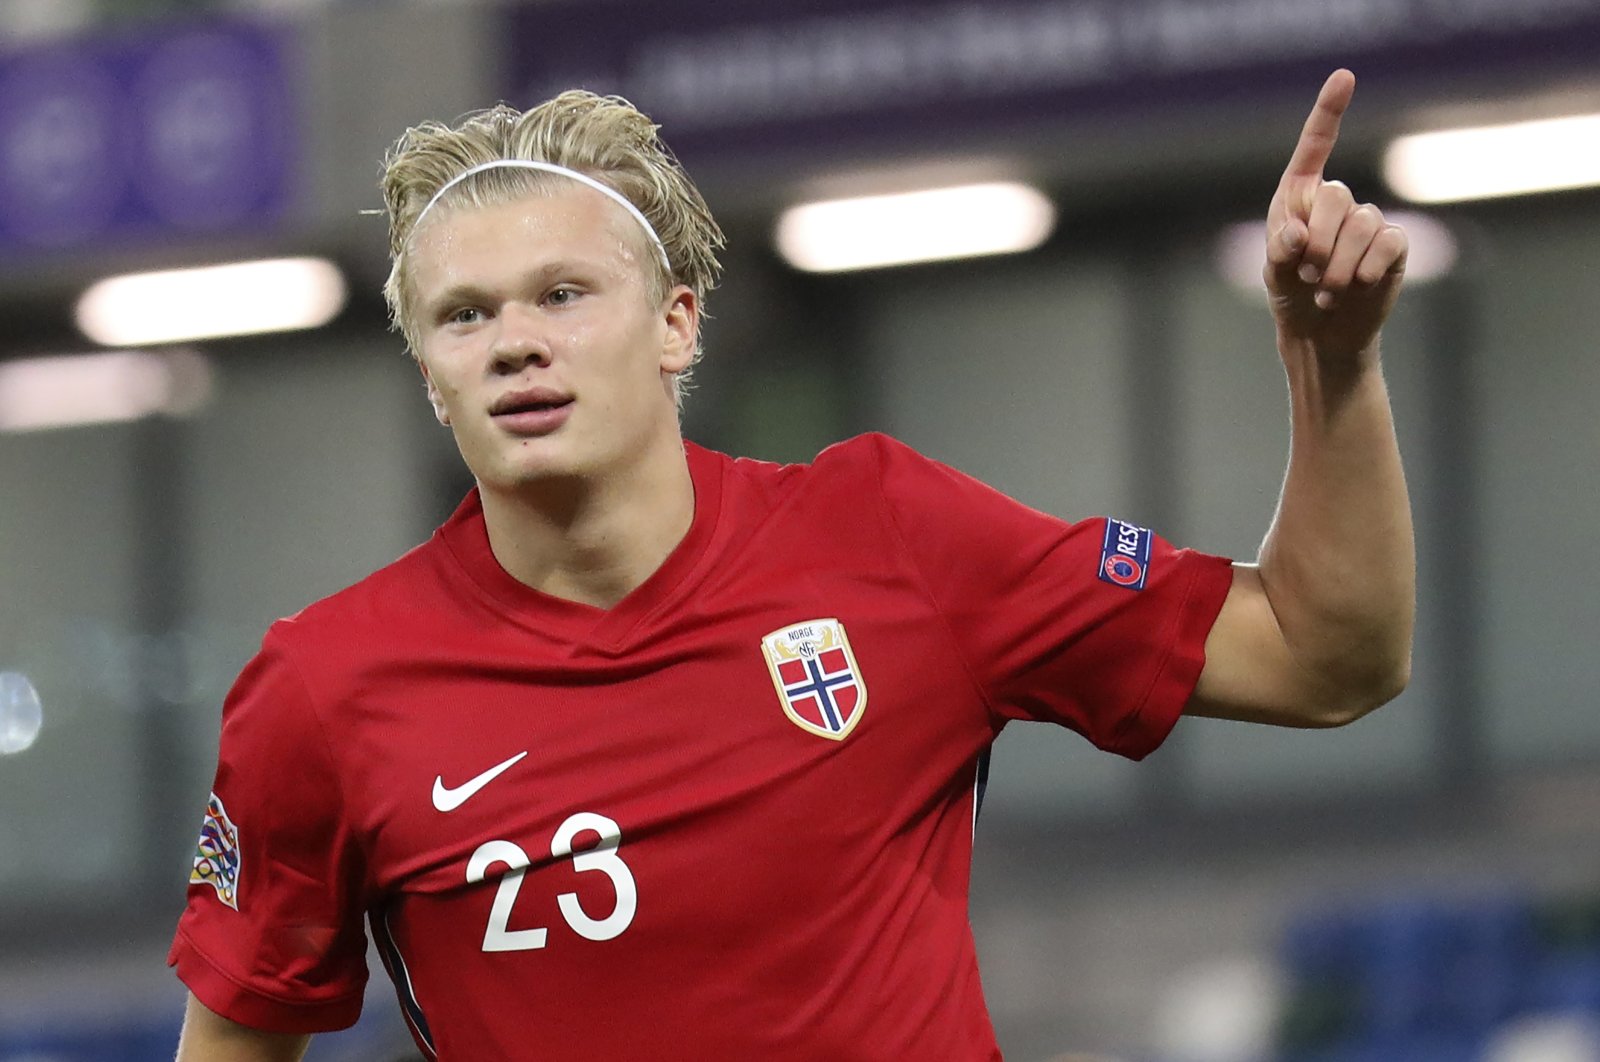 Norway's Erling Haaland celebrates a goal during a UEFA Nations League match against Northern Ireland, in Belfast, Northern Ireland, Sept. 7, 2020. (AP Photo)